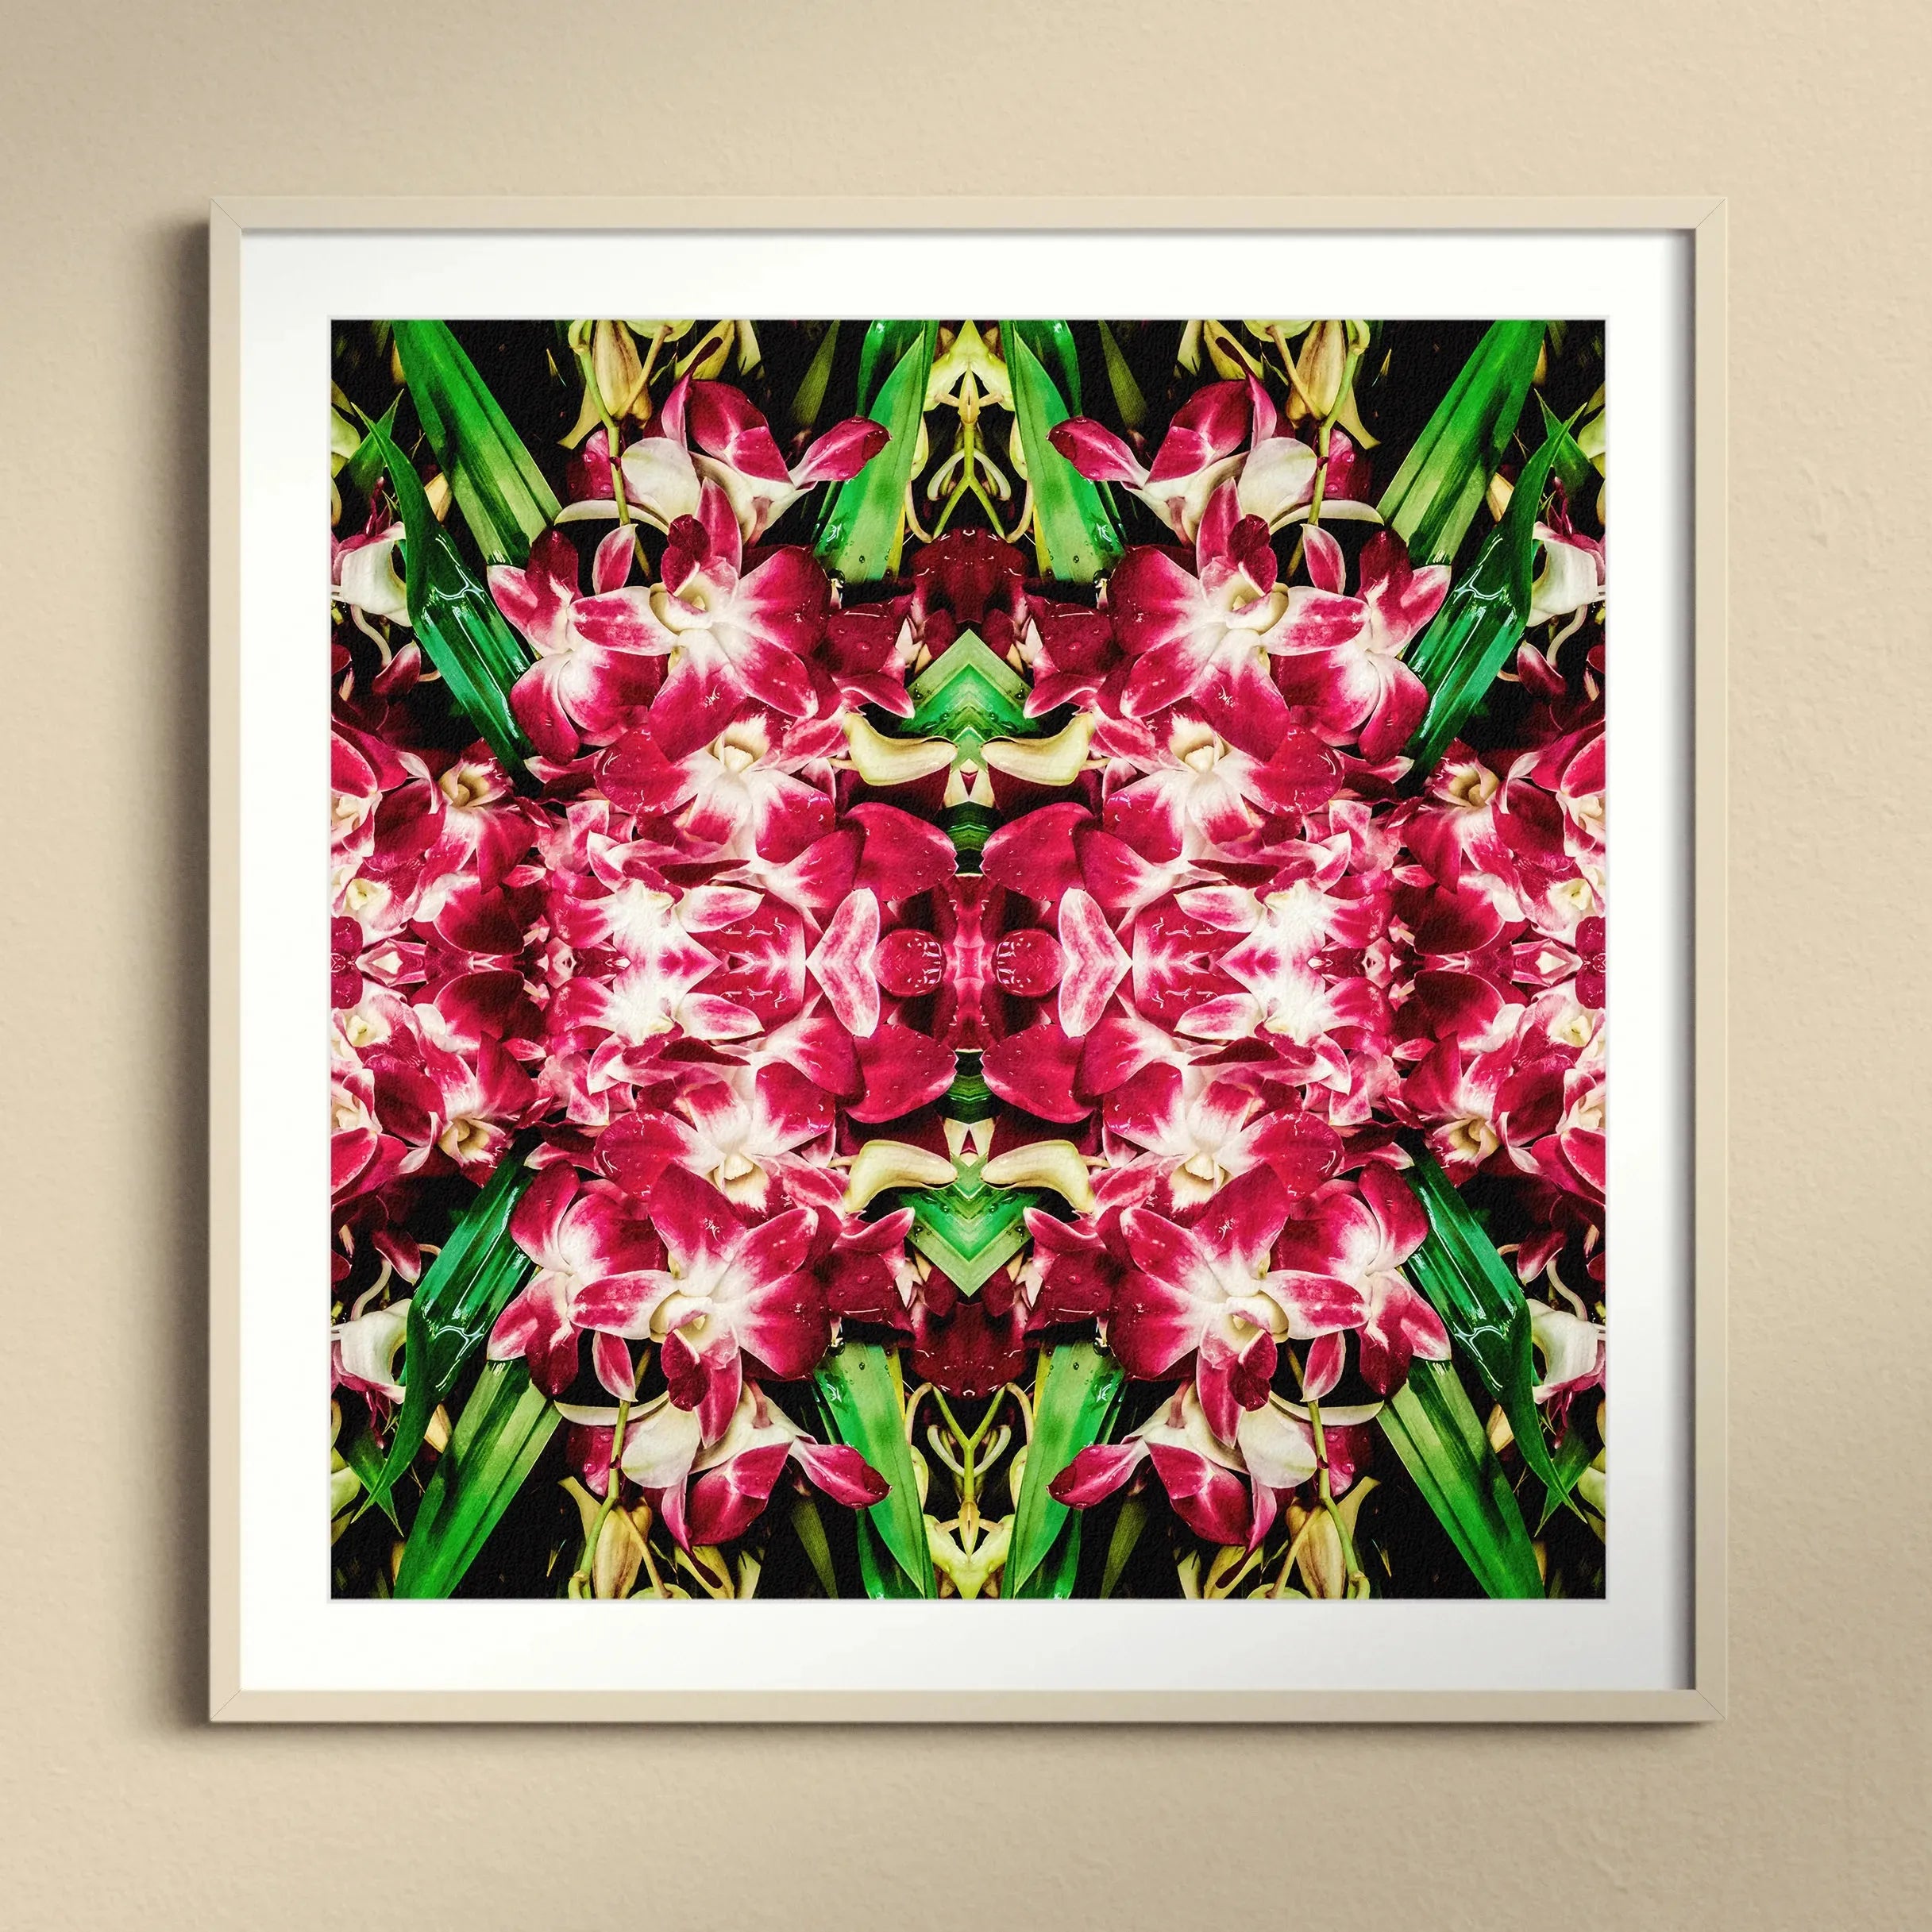 Ruby Reds Framed & Mounted Print - Posters Prints & Visual Artwork - Aesthetic Art